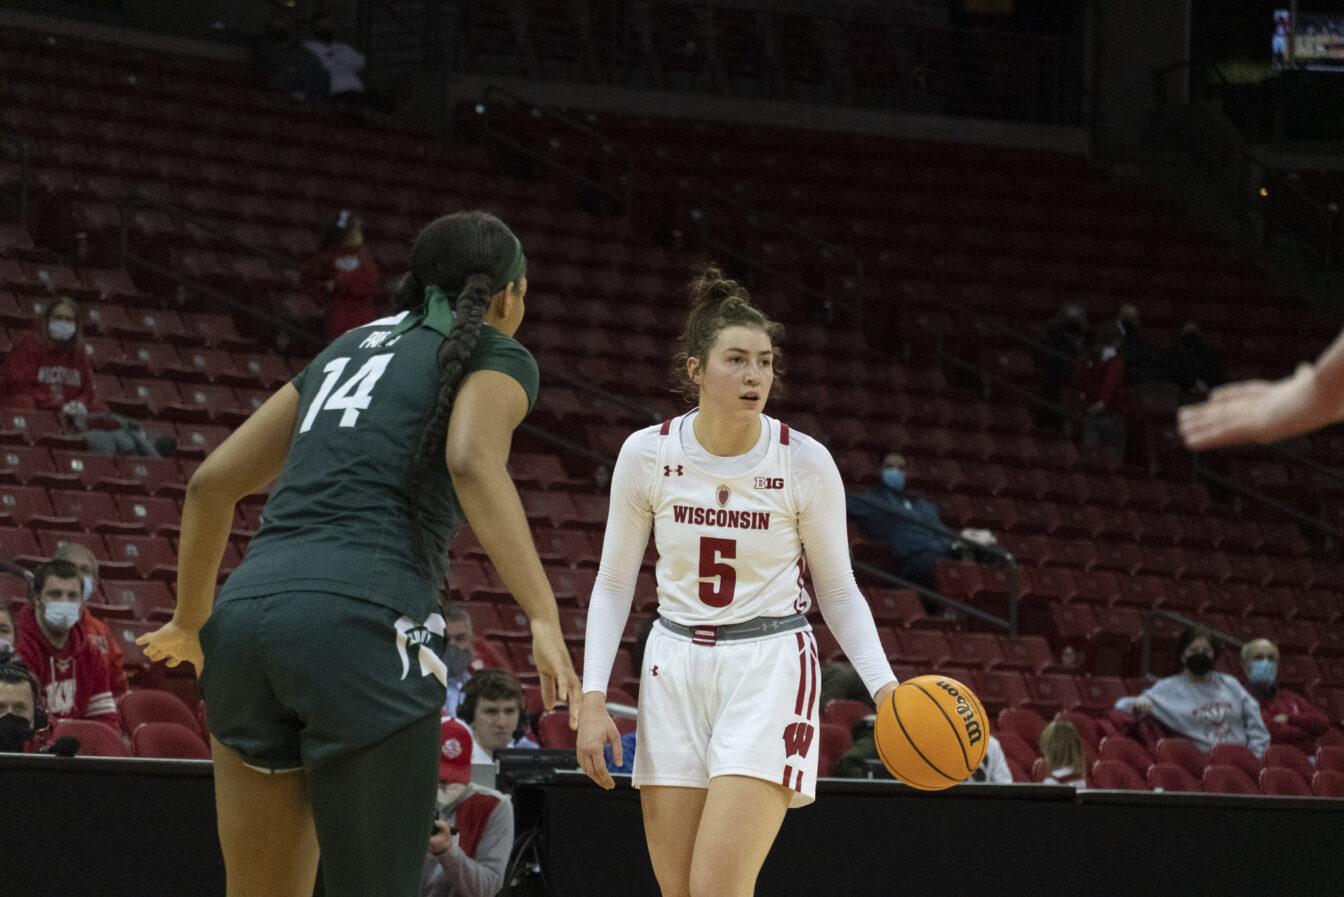 Womens+Basketball%3A+Wisconsin+set+up+for+success+in+Marisa+Moseleys+second+season